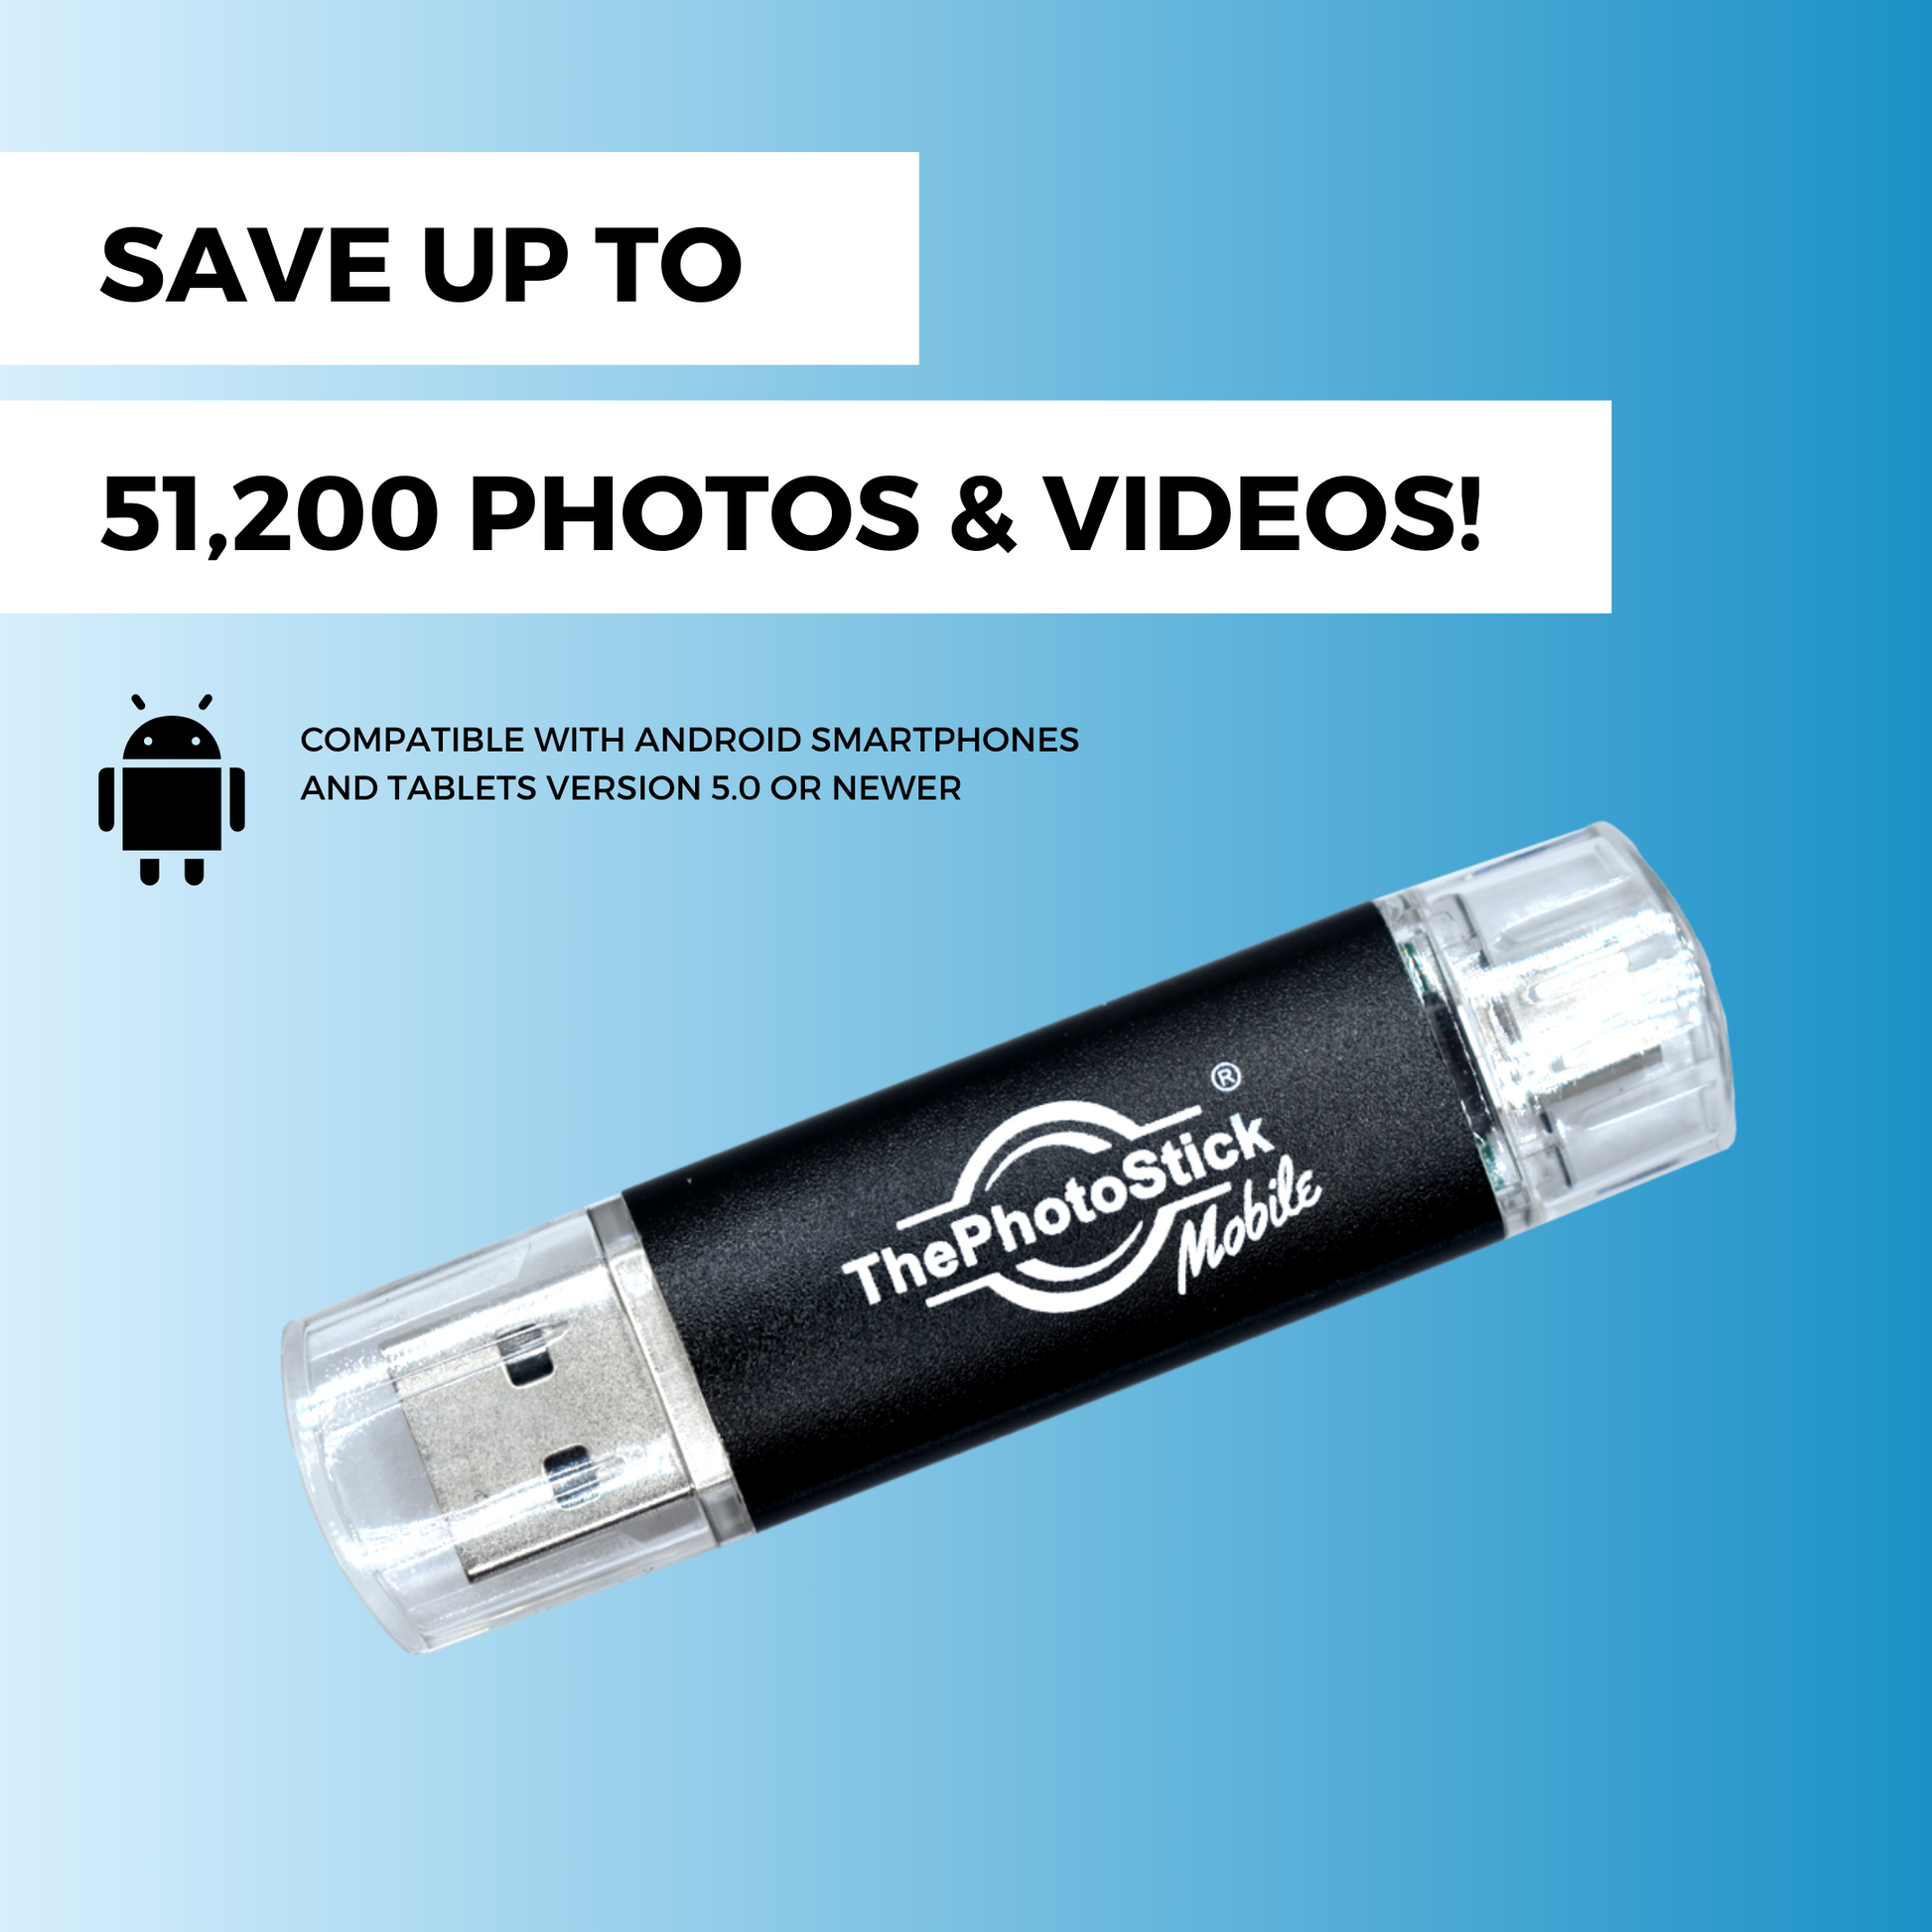 ThePhotoStick® and ThePhotoStick® Mobile - Official Site